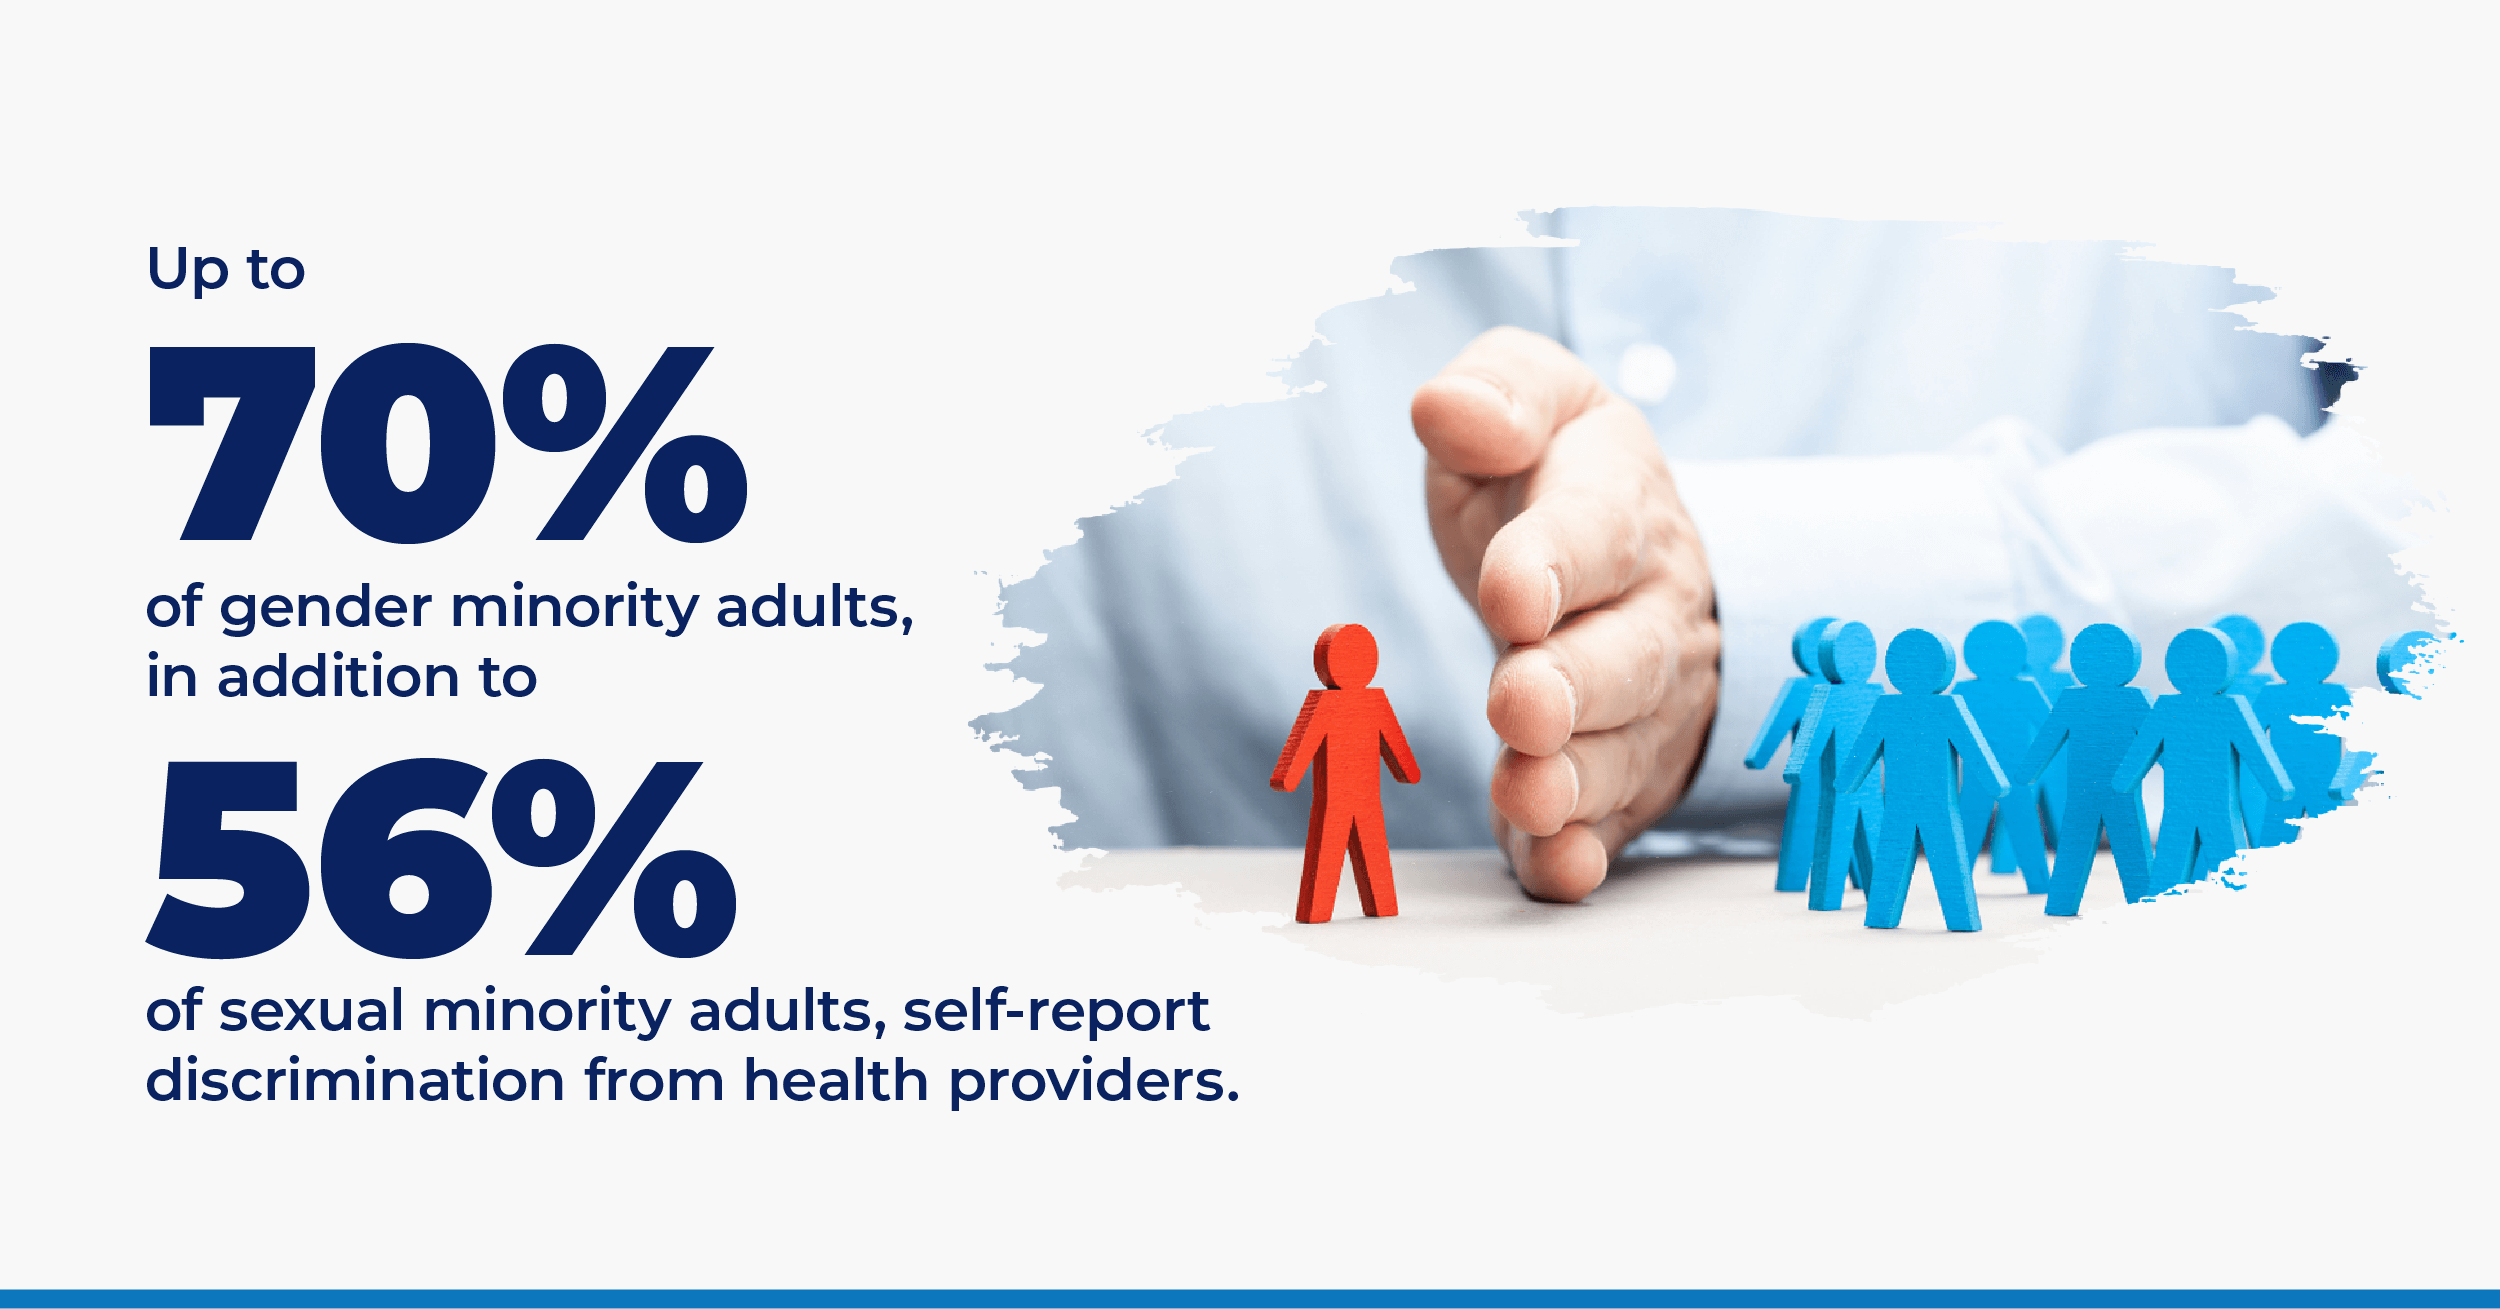 Up to 70% of gender minority adults in addition to 56% of sexual minority adults, self-report discrimination from health providers. Source: https://legacy.lambdalegal.org/sites/default/files/publications/downloads/whcic-report_when-health-care-isnt-caring.pdf